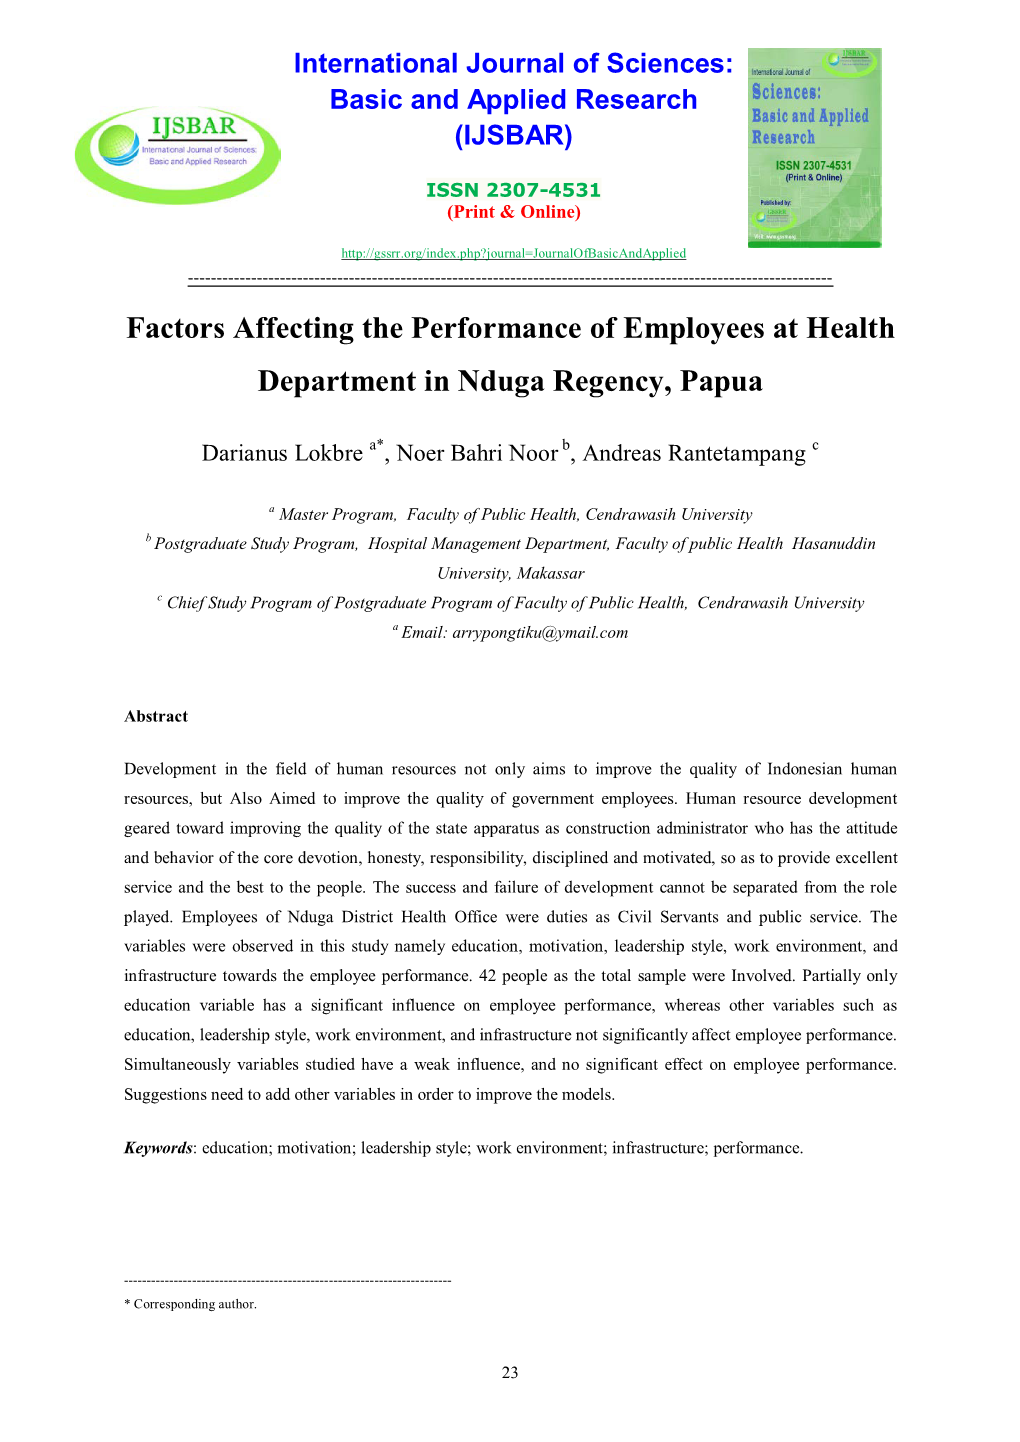 Factors Affecting the Performance of Employees at Health Department in Nduga Regency, Papua